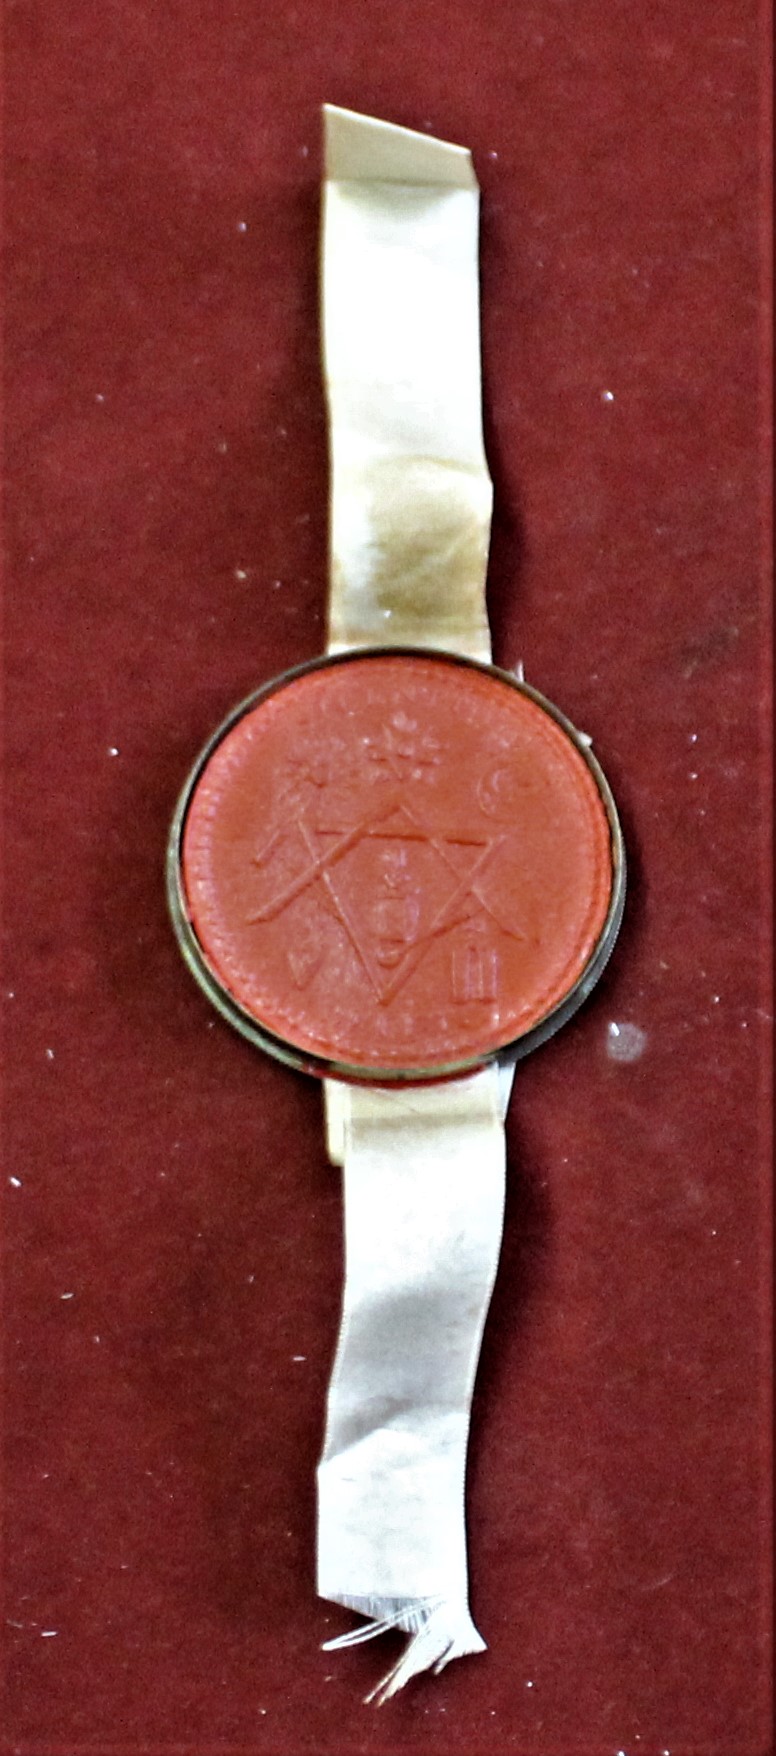 Masonic wax seal, which reads "Dei et Silentium", in brass case and white ribbon